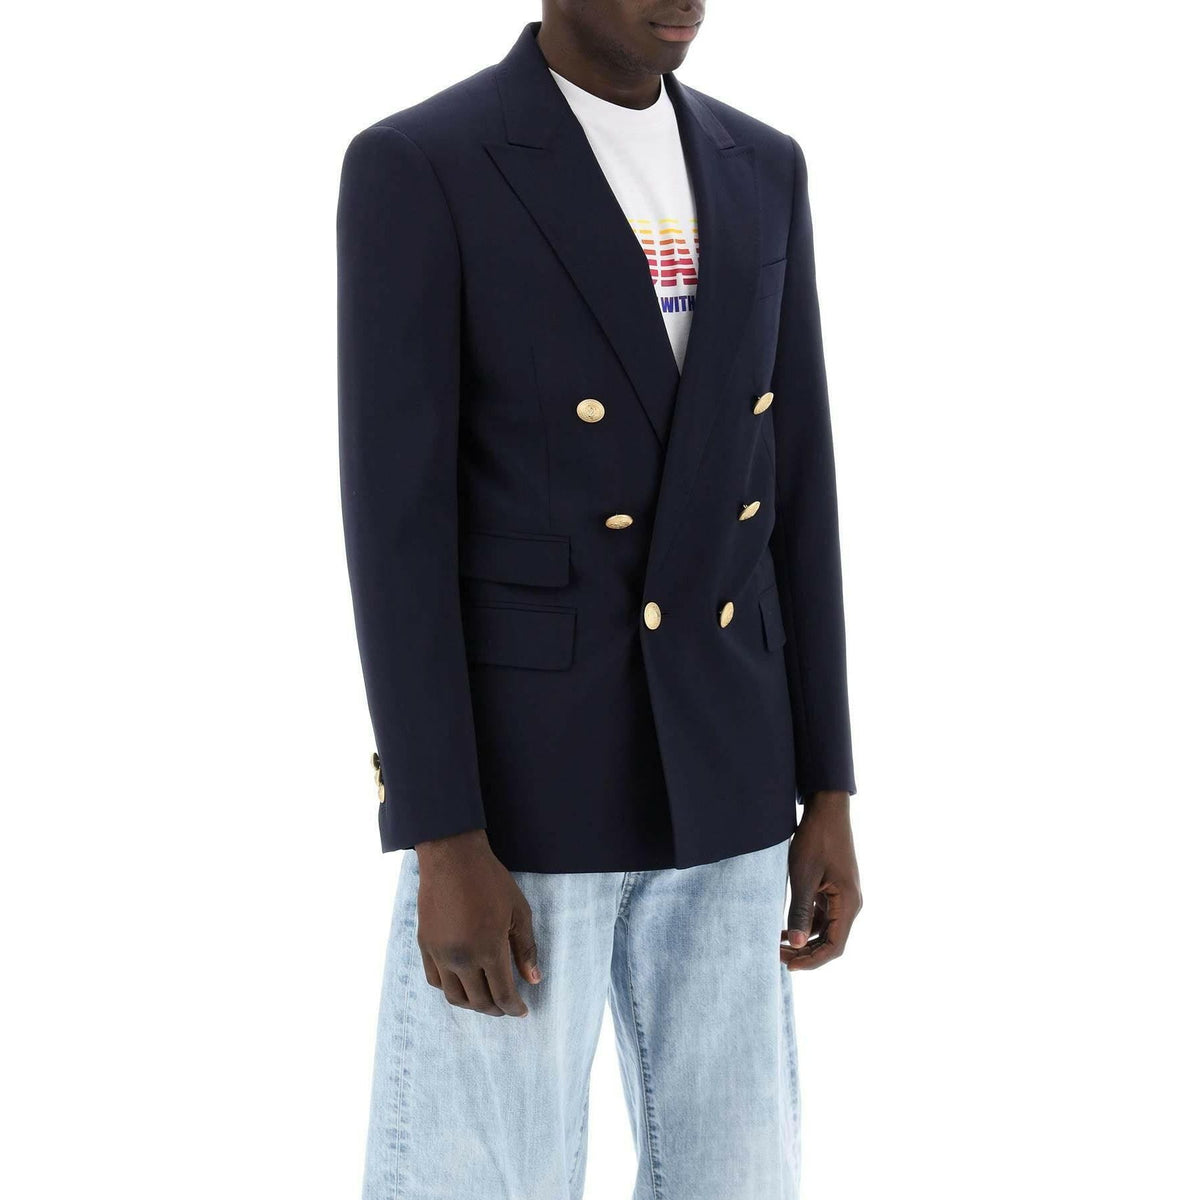 Navy Blue Wool Palm Beach Double-Breasted Jacket With Gold Buttons DSQUARED2 JOHN JULIA.